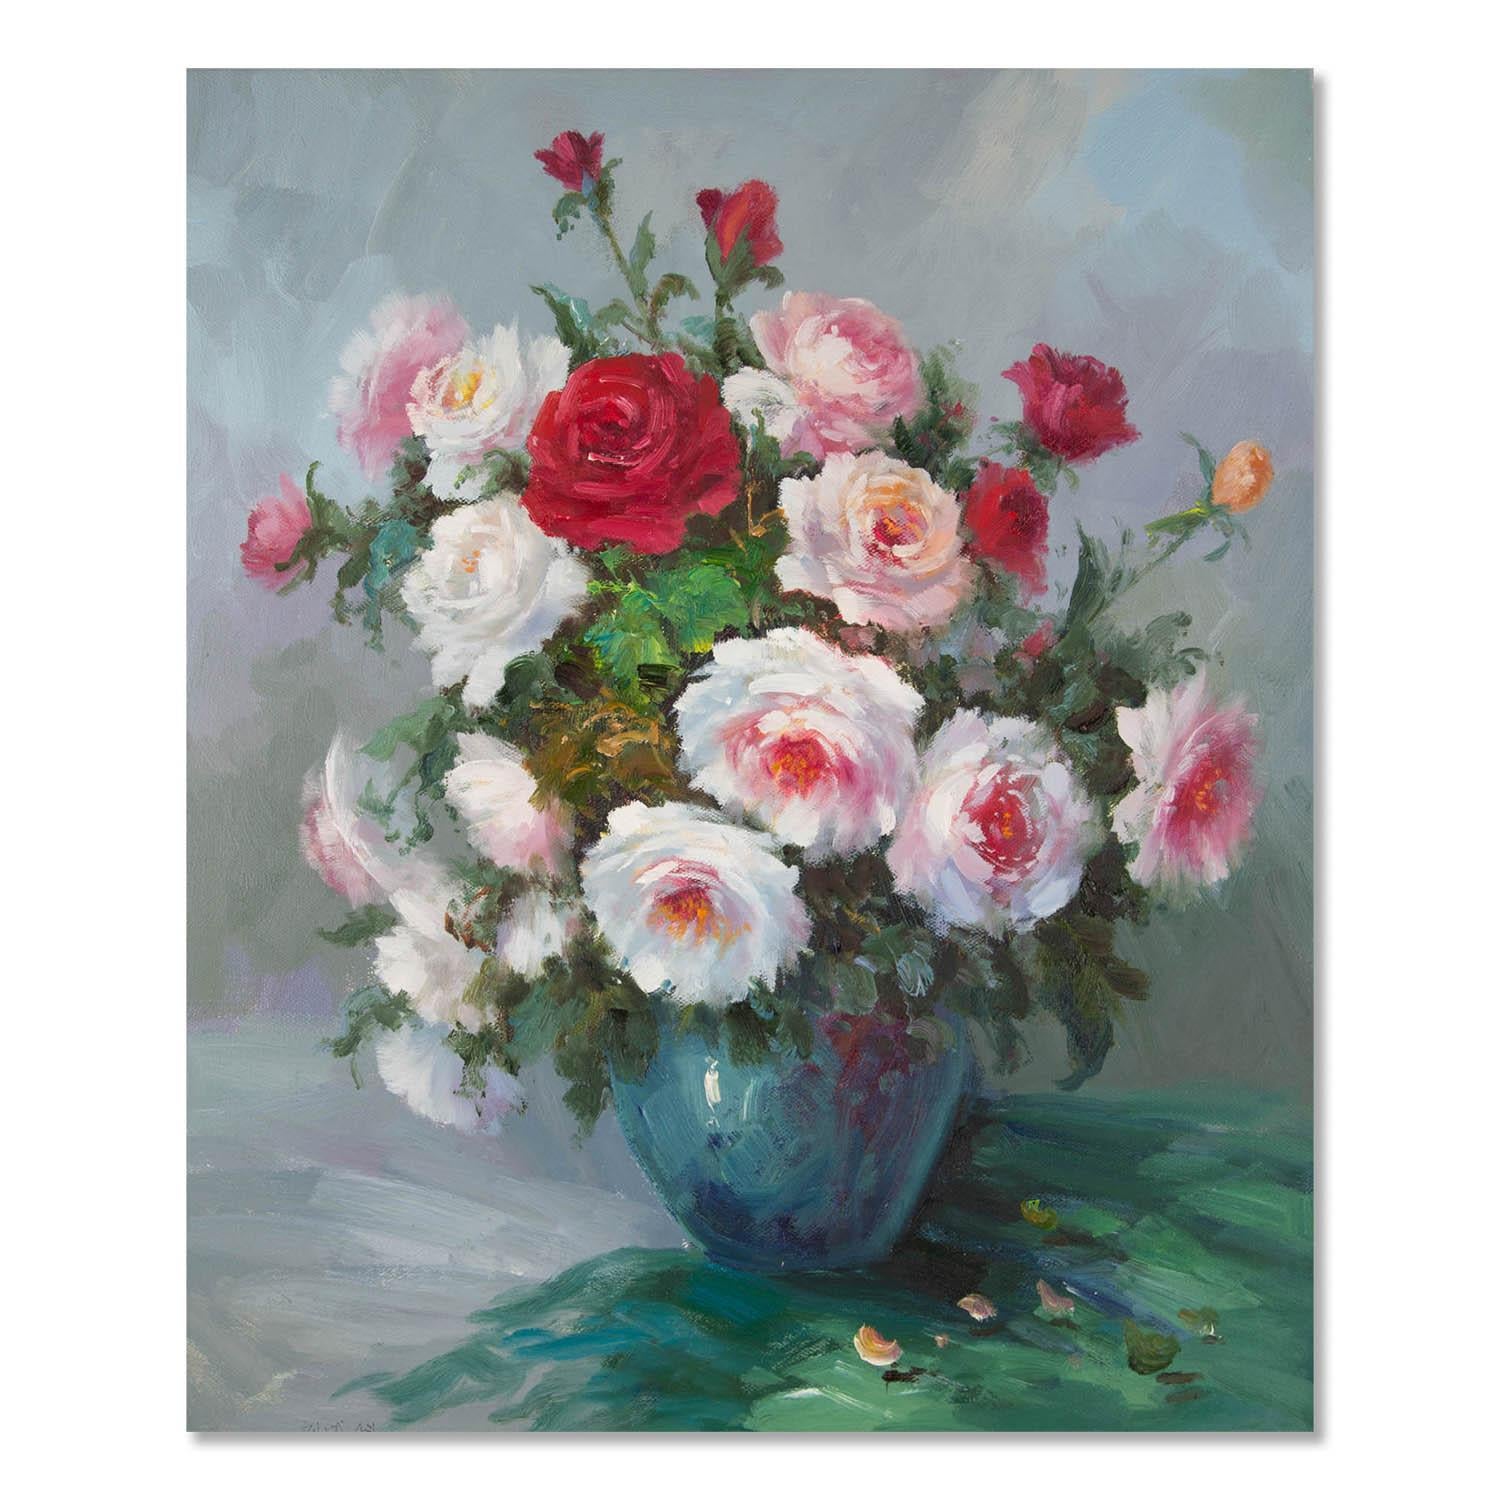  Title: Peony
 Medium: Oil on canvas
 Size: 23 x 19 inches
 Frame: Framing options available!
 Condition: The painting appears to be in excellent condition.
 
 Year: 2000 Circa
 Artist: Chengke Liu
 Signature: Unsigned
 Signature Location: N/A
